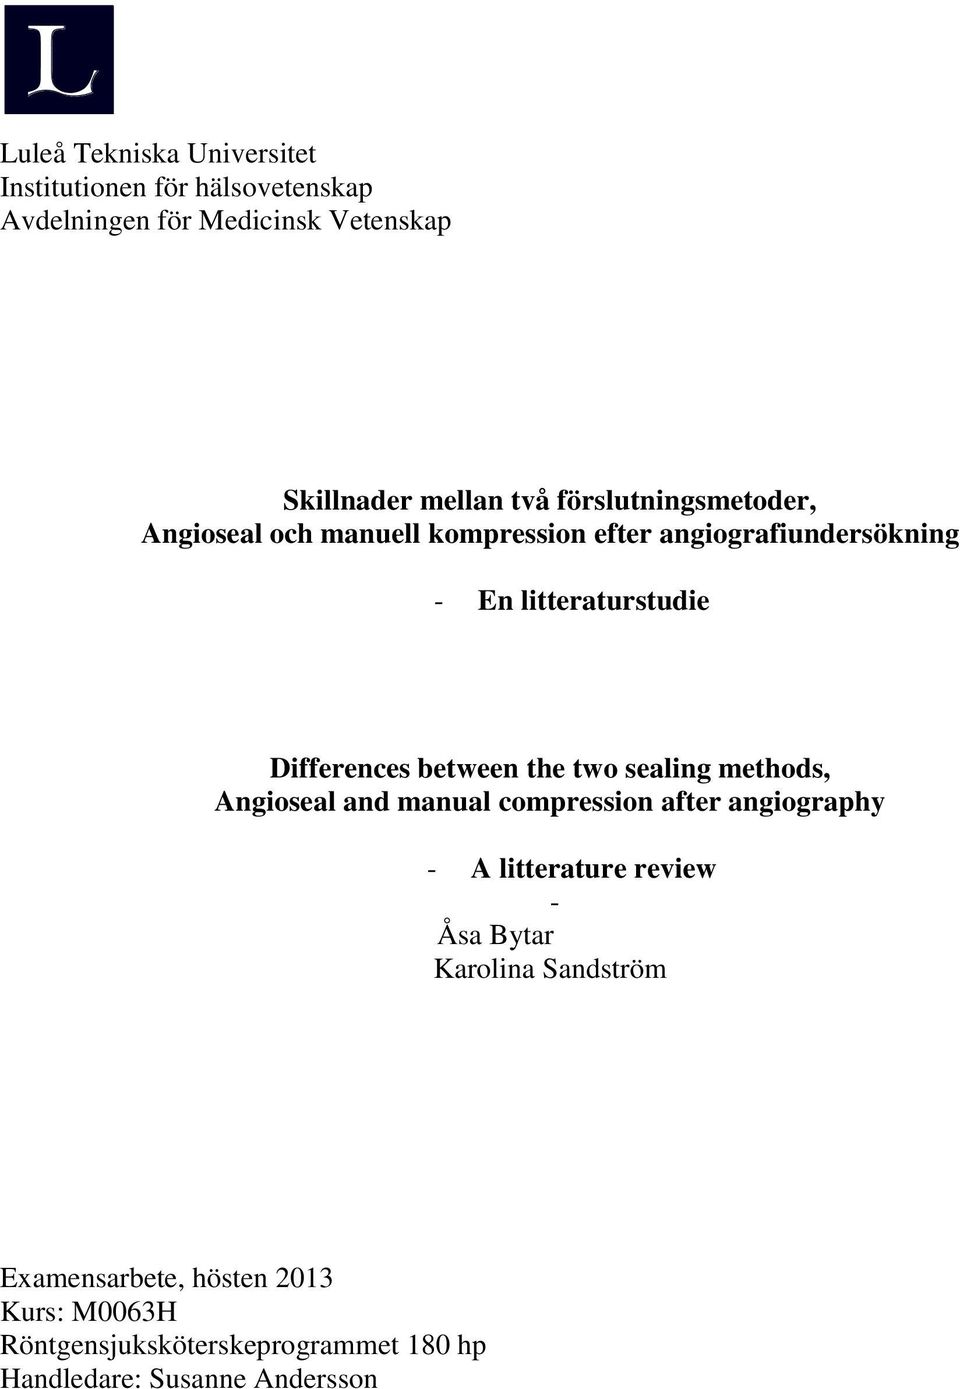 between the two sealing methods, Angioseal and manual compression after angiography - A litterature review - Åsa Bytar